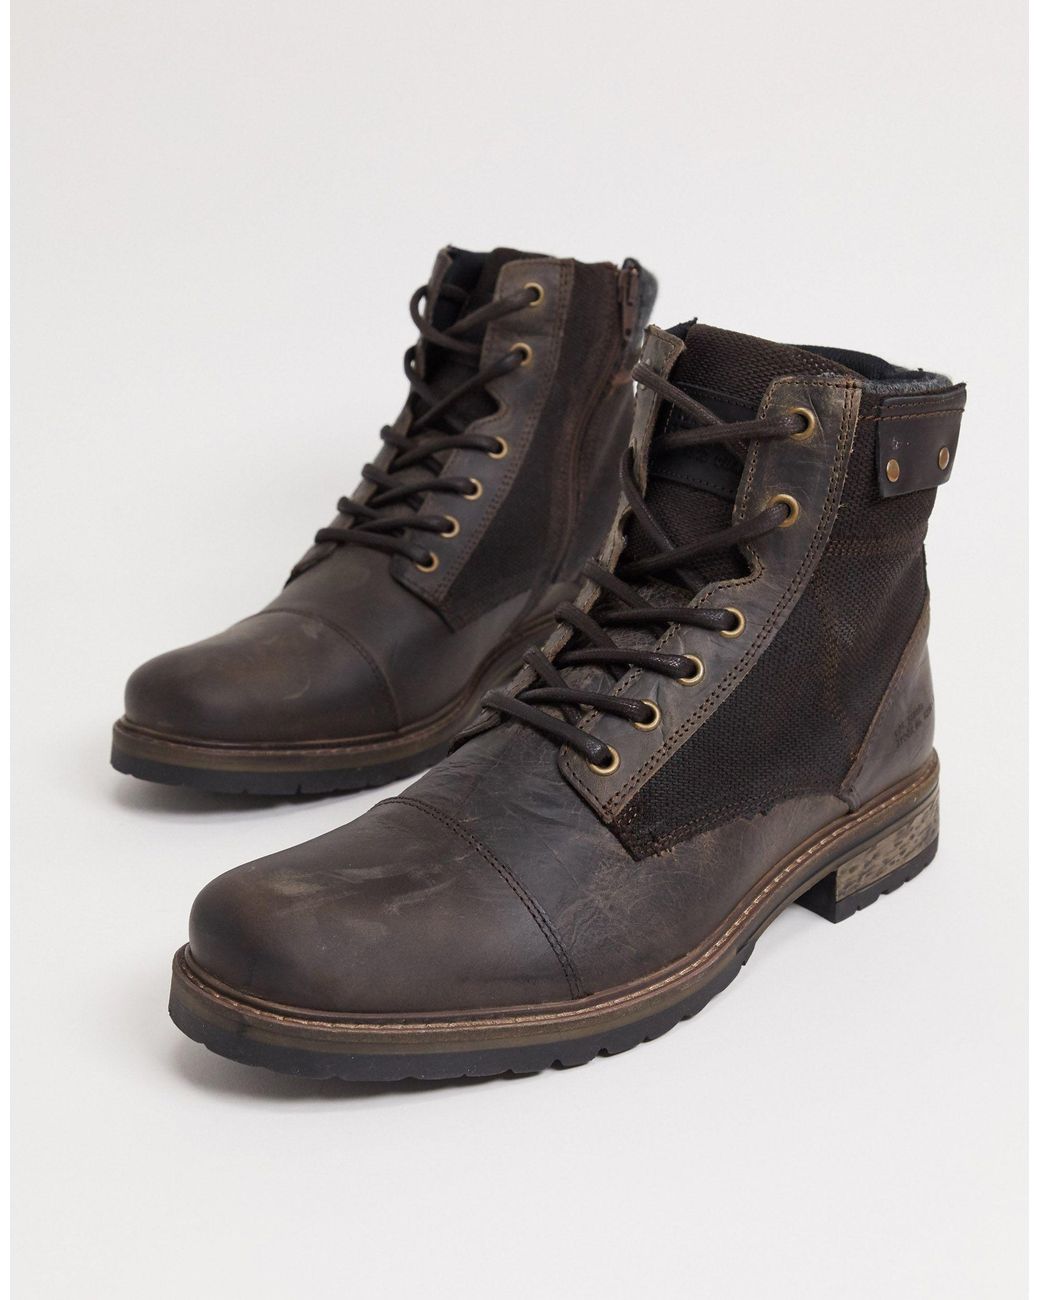 River Island Boots in Brown for Men - Lyst